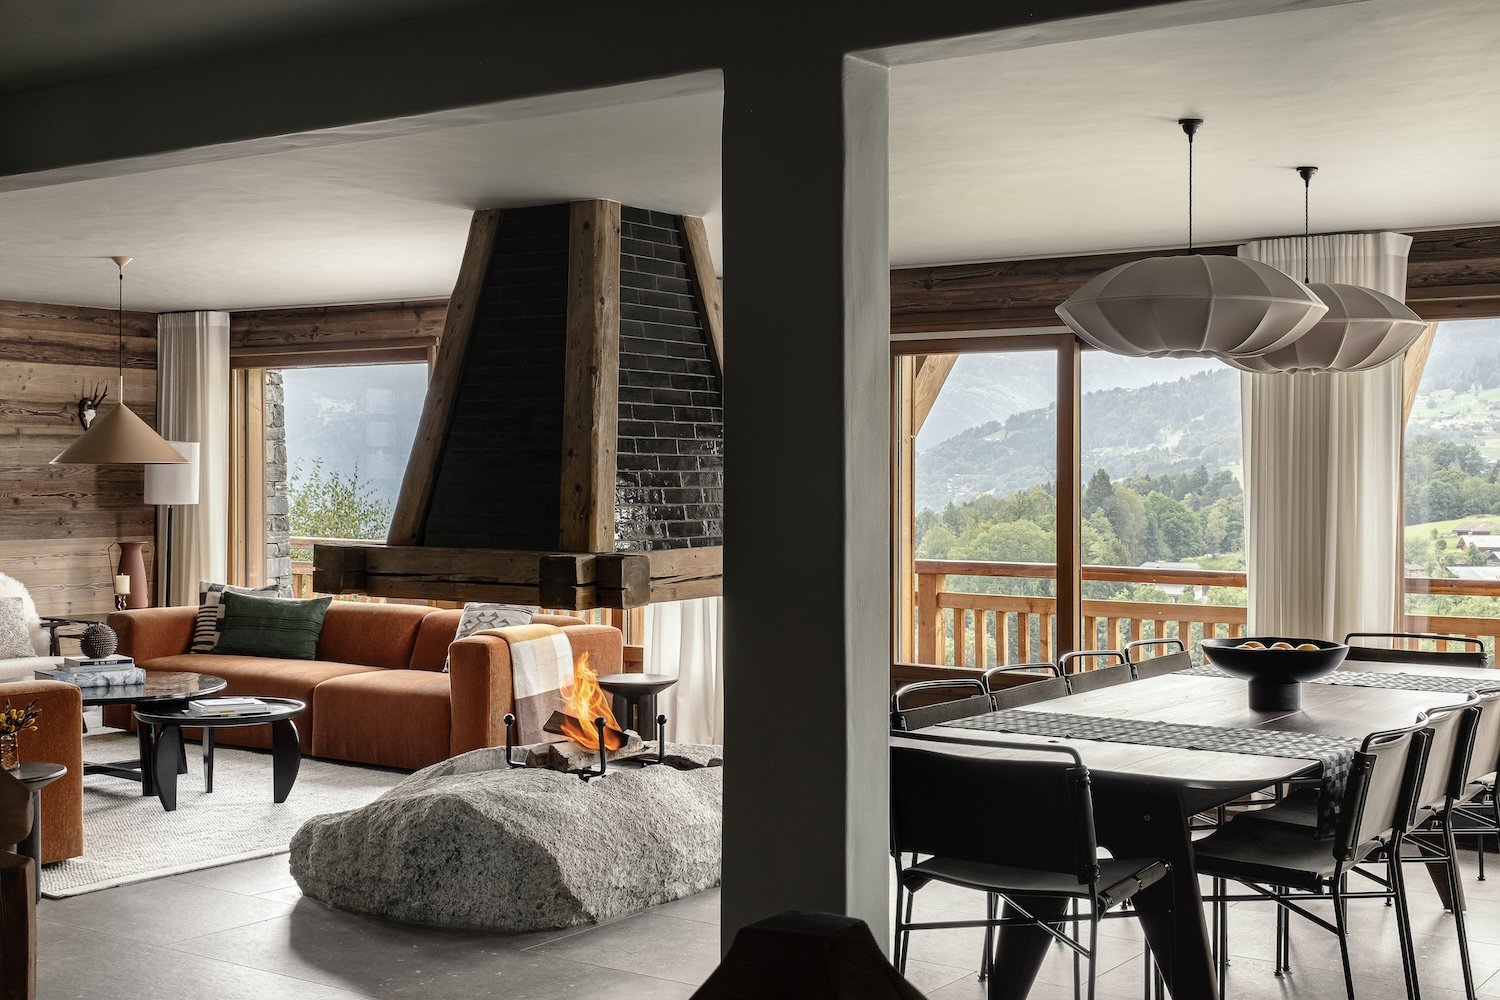 Francis+York+Discover This Luxury Chalet in the French Alps From The August Premium Collection 00050.jpg